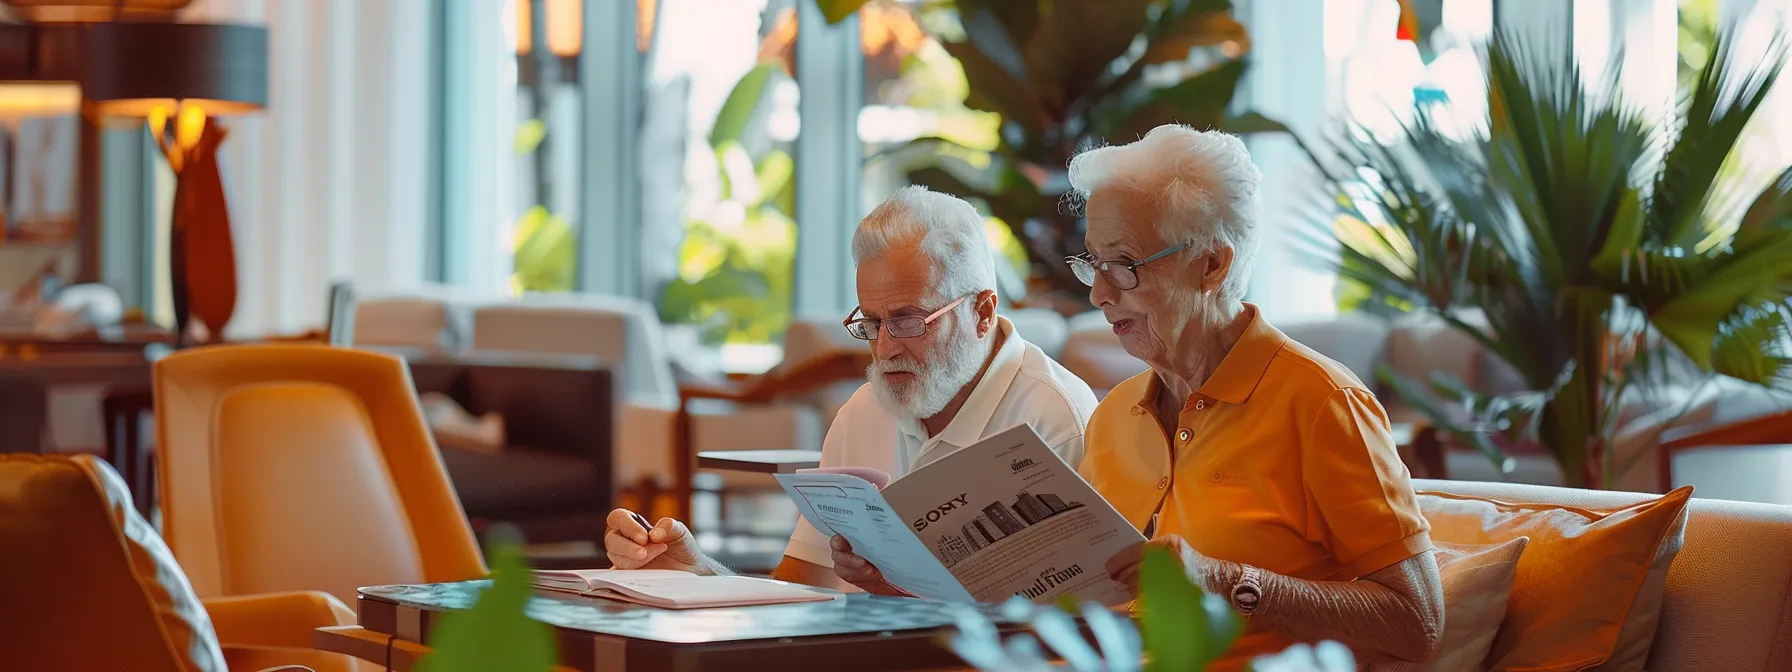 a senior couple examining property listings in a miami real estate office.